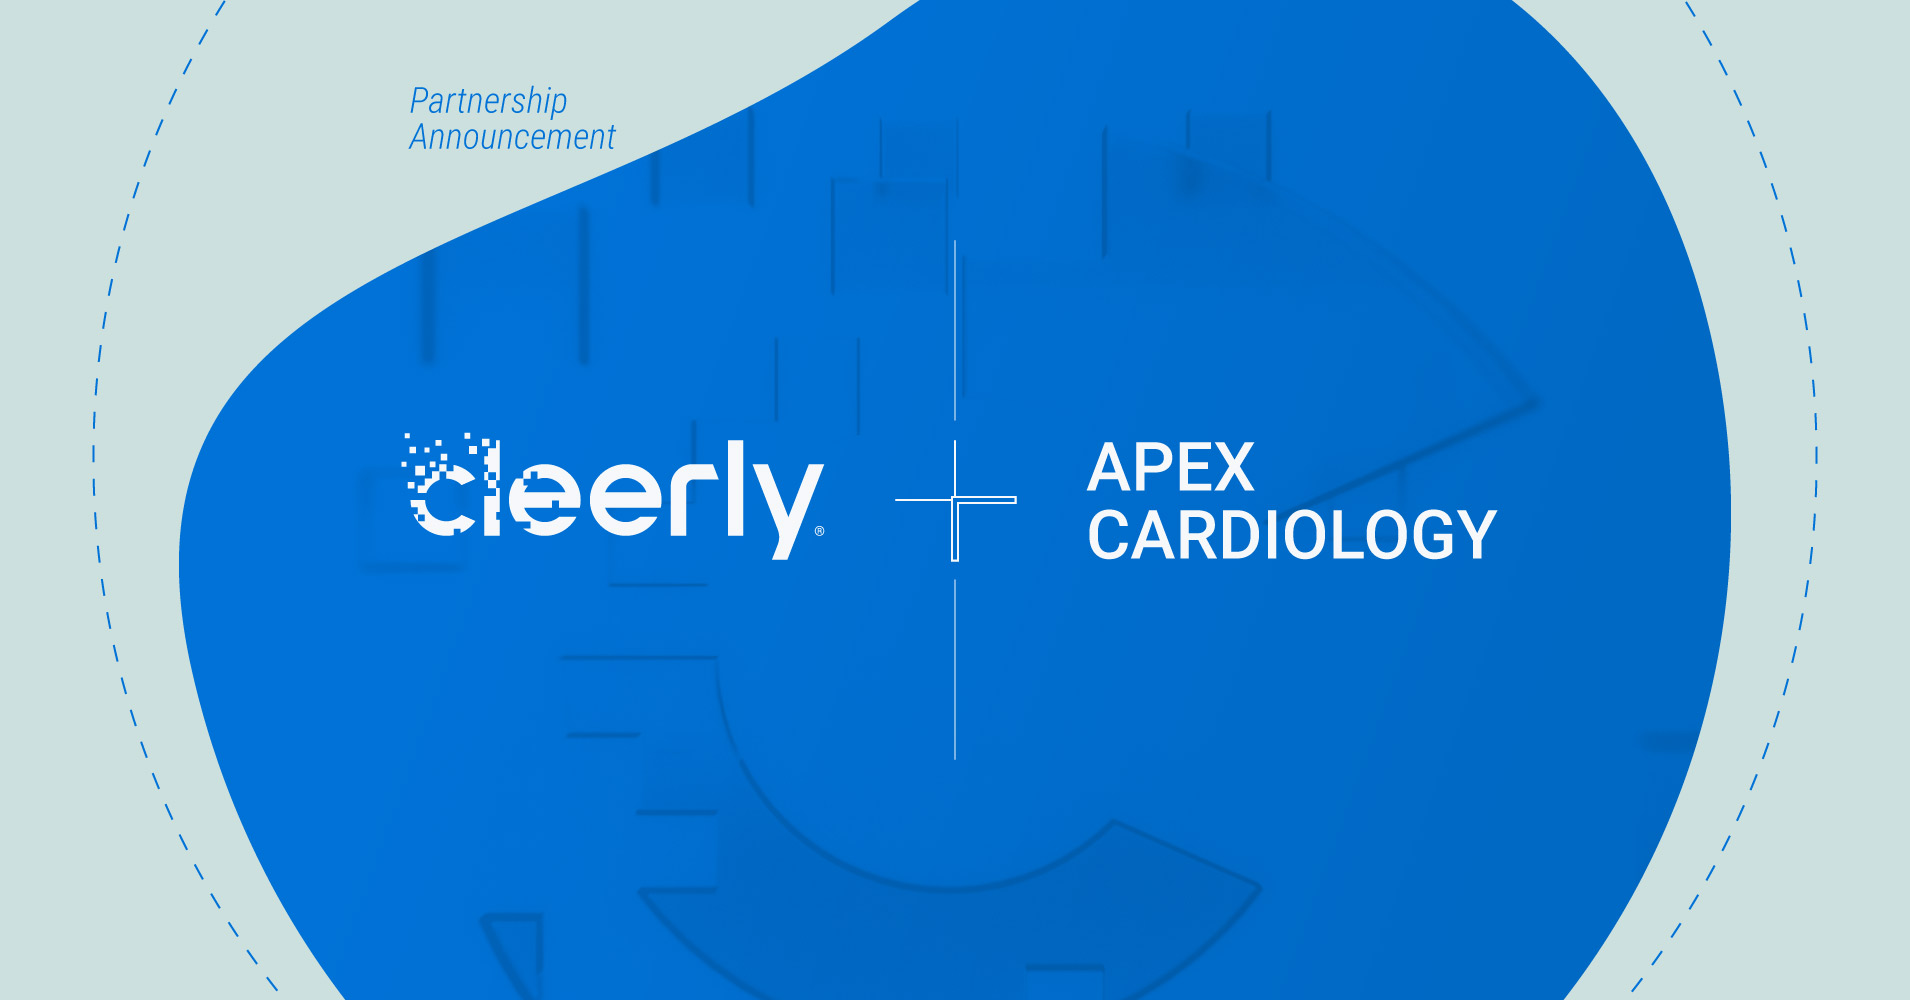 Cleerly Partners with Apex Cardiology to Offer New Standard of Care for Heart Disease Prevention